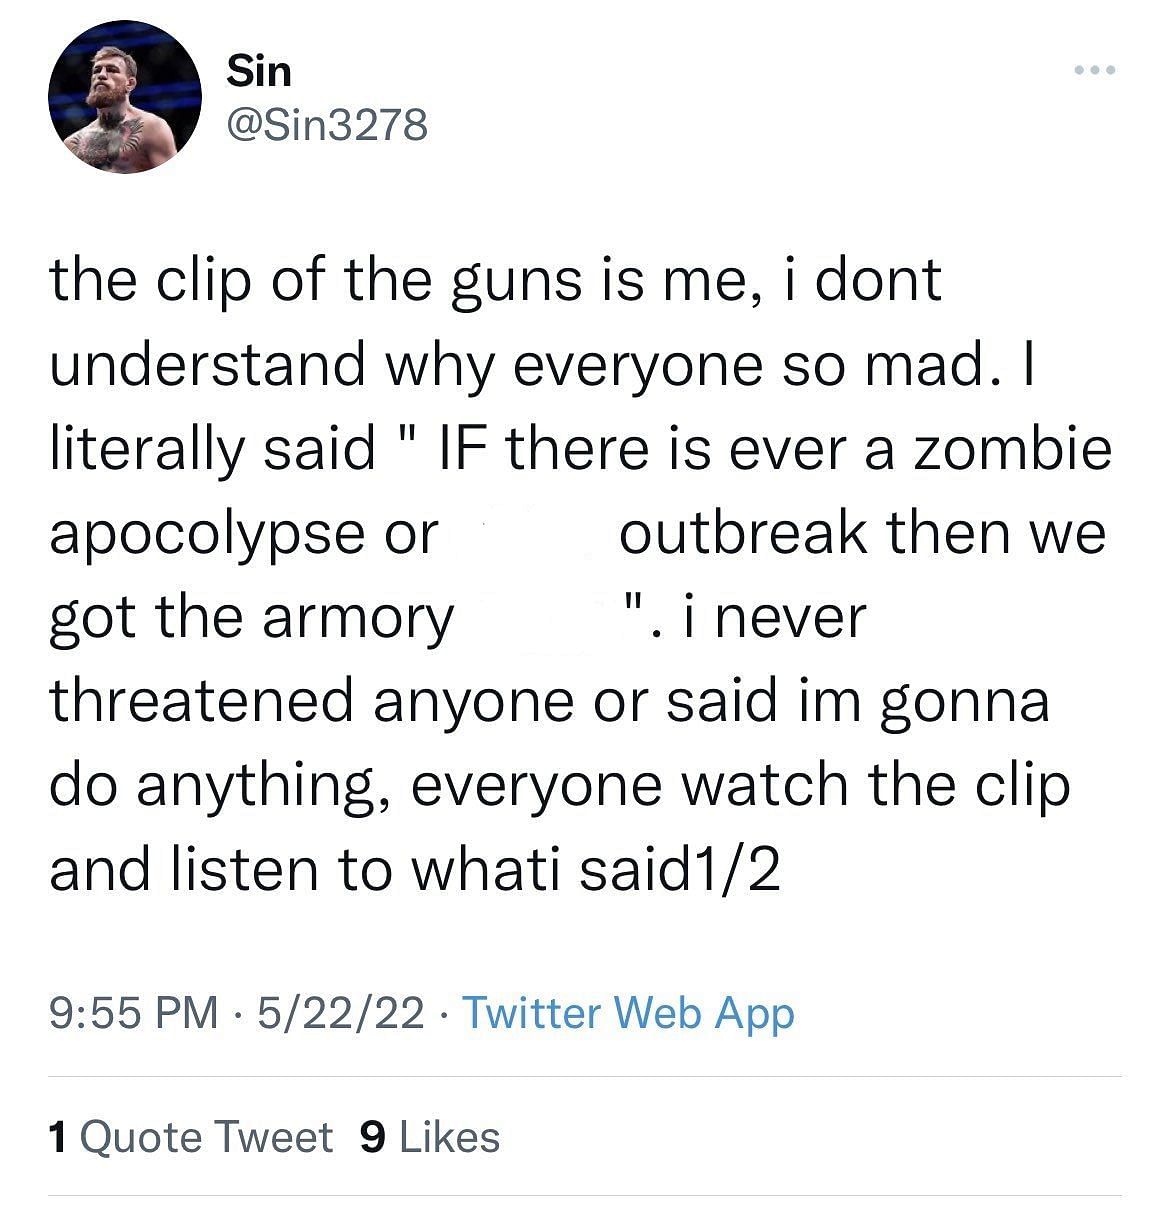 Fortnite player responding to the fans about his racist viral video (Image via Sin3278/Twitter)